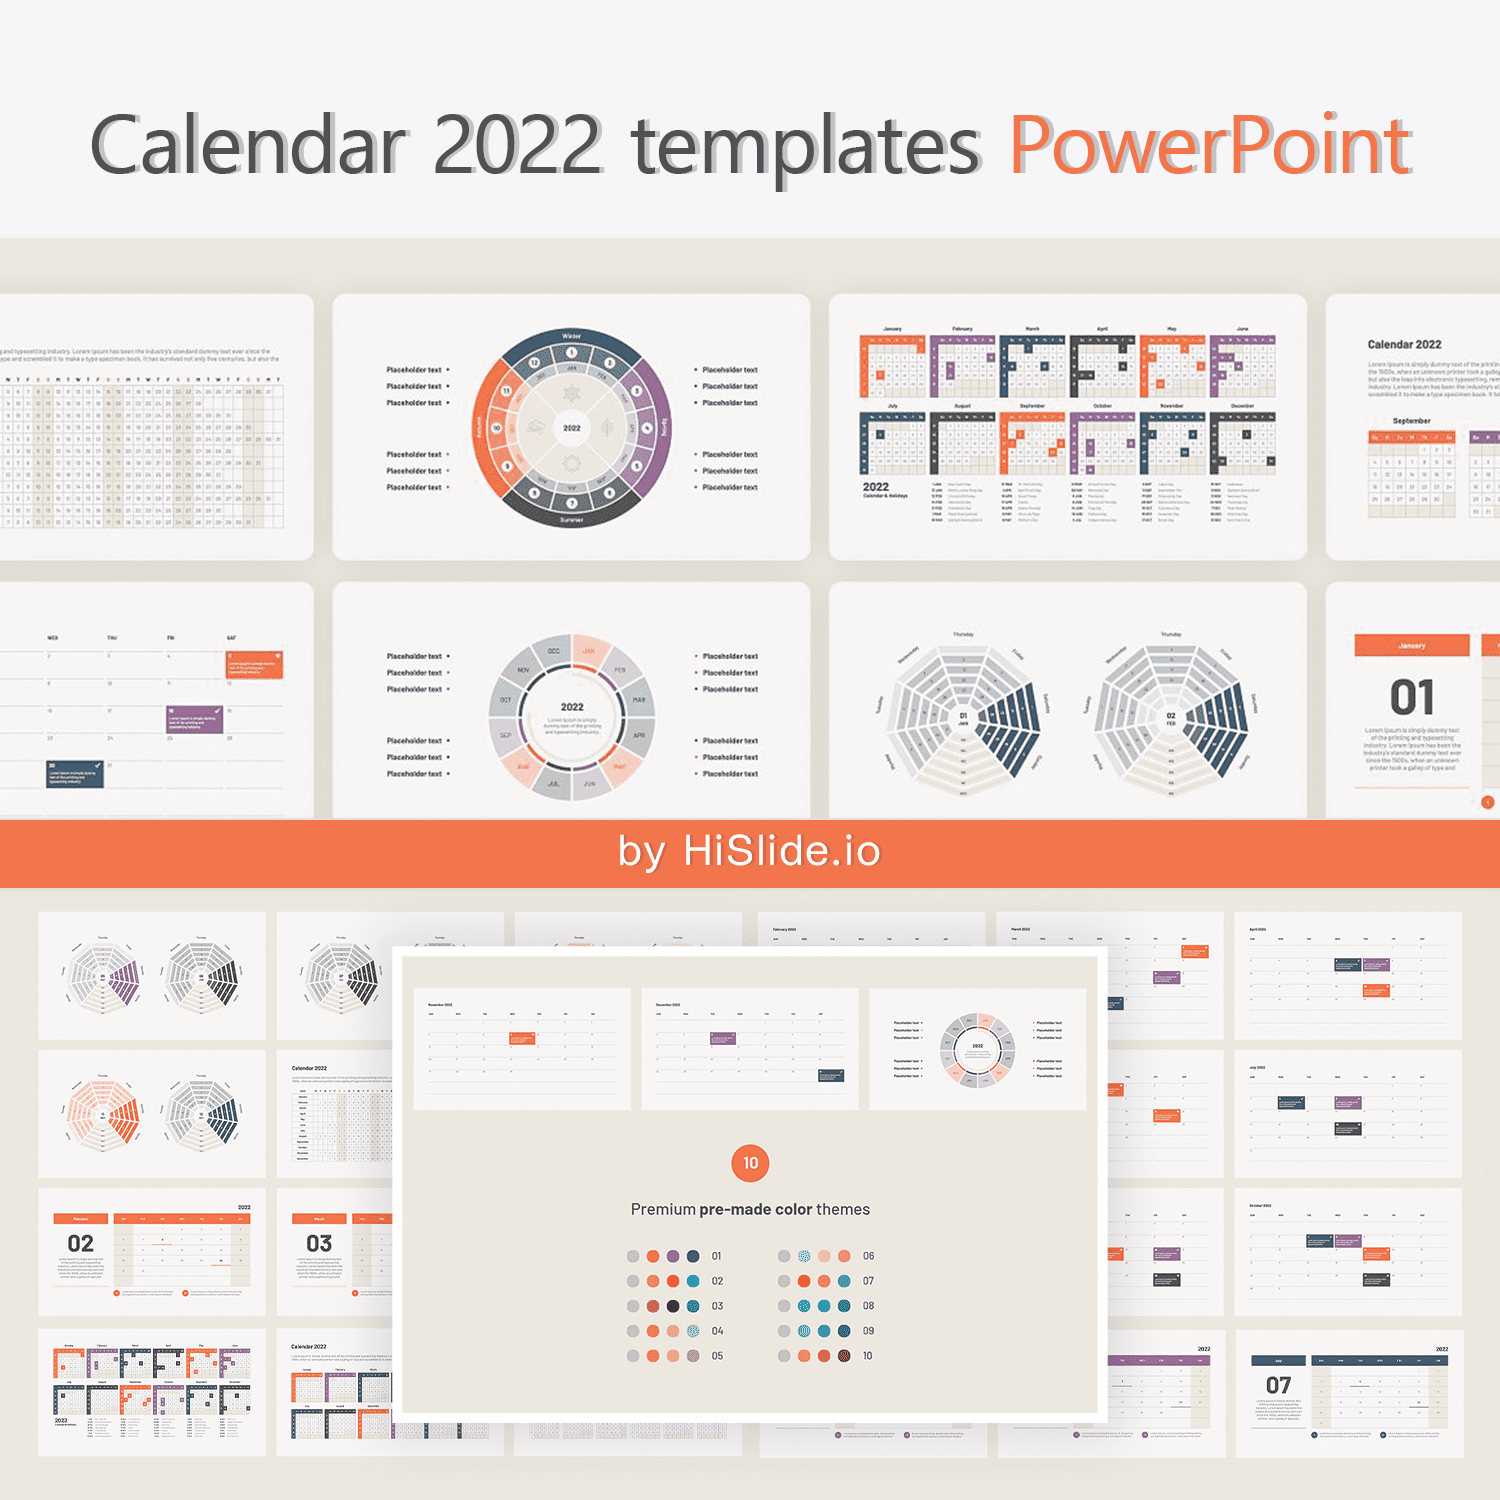 Calendar 2022 Templates PowerPoint cover image.